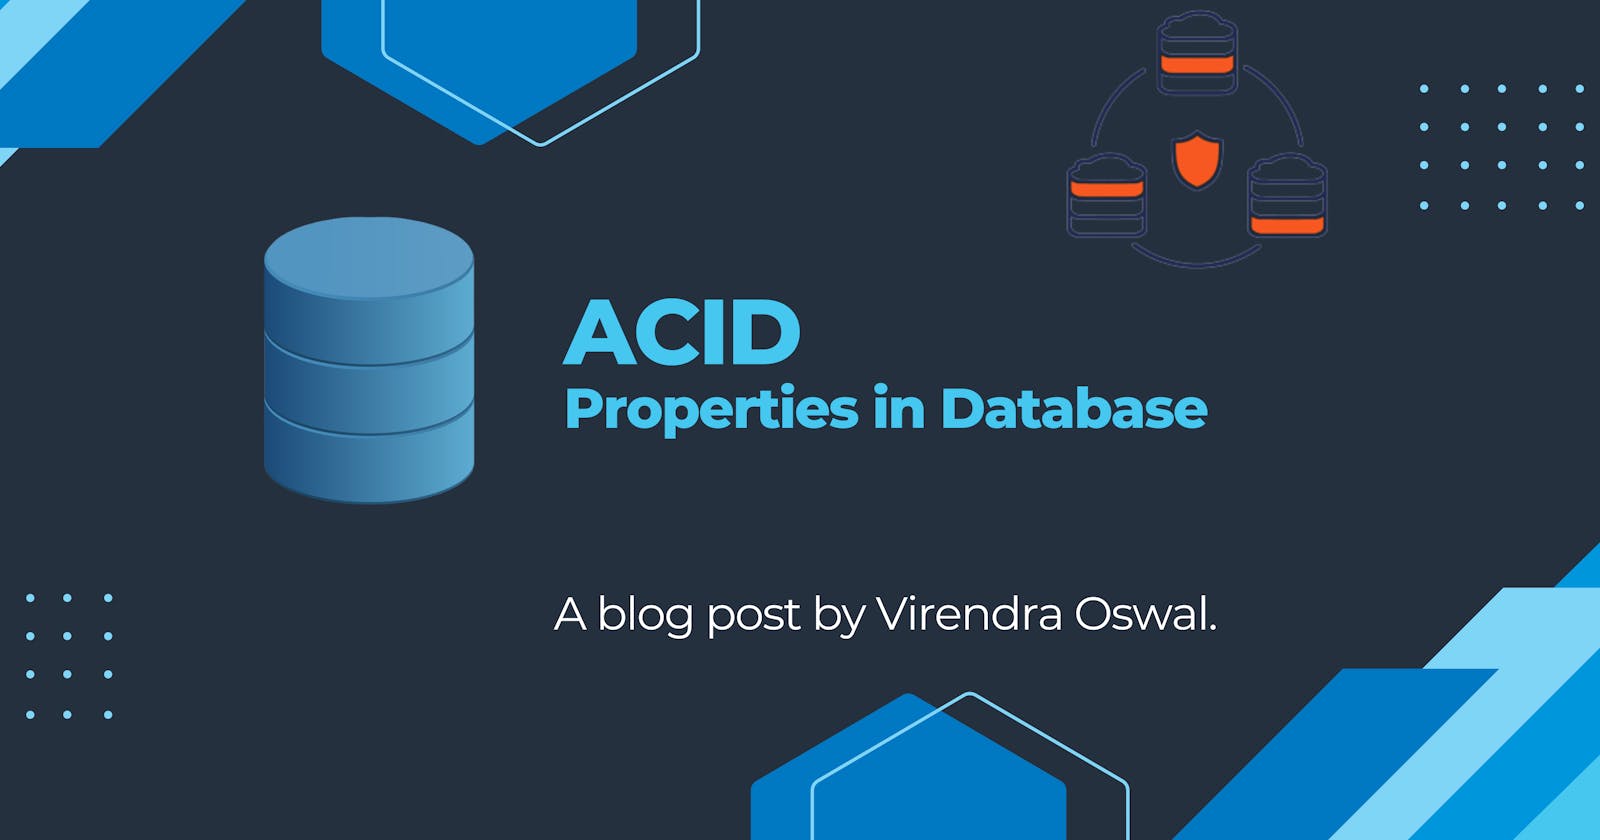 ACID Principles: The Key to Secure and Efficient Database Transactions